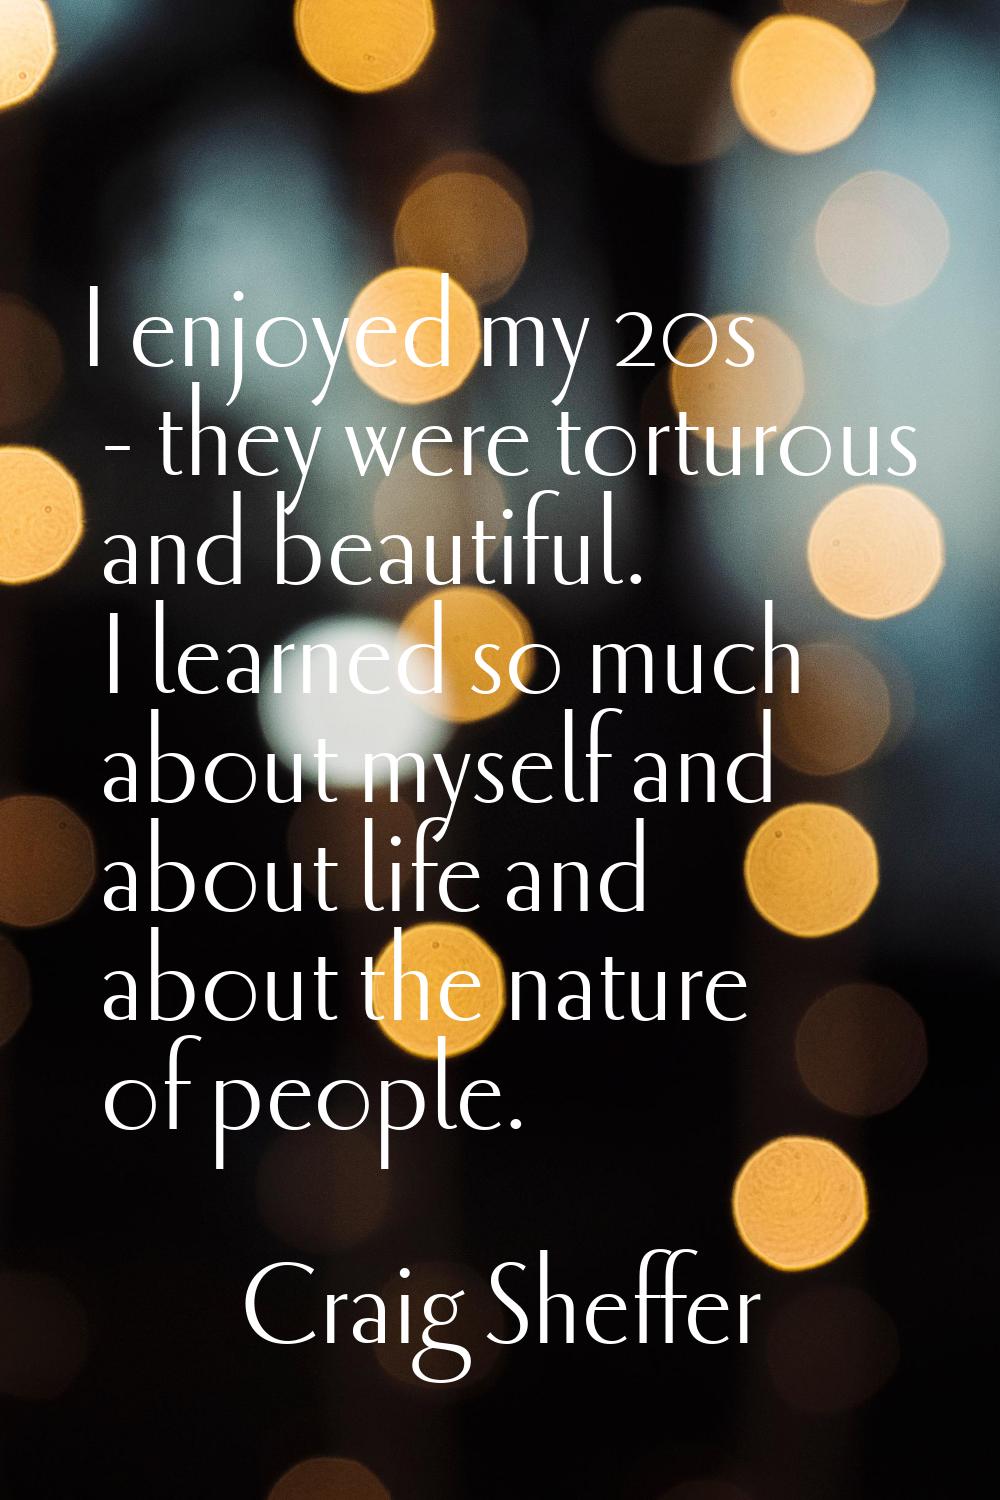 I enjoyed my 20s - they were torturous and beautiful. I learned so much about myself and about life